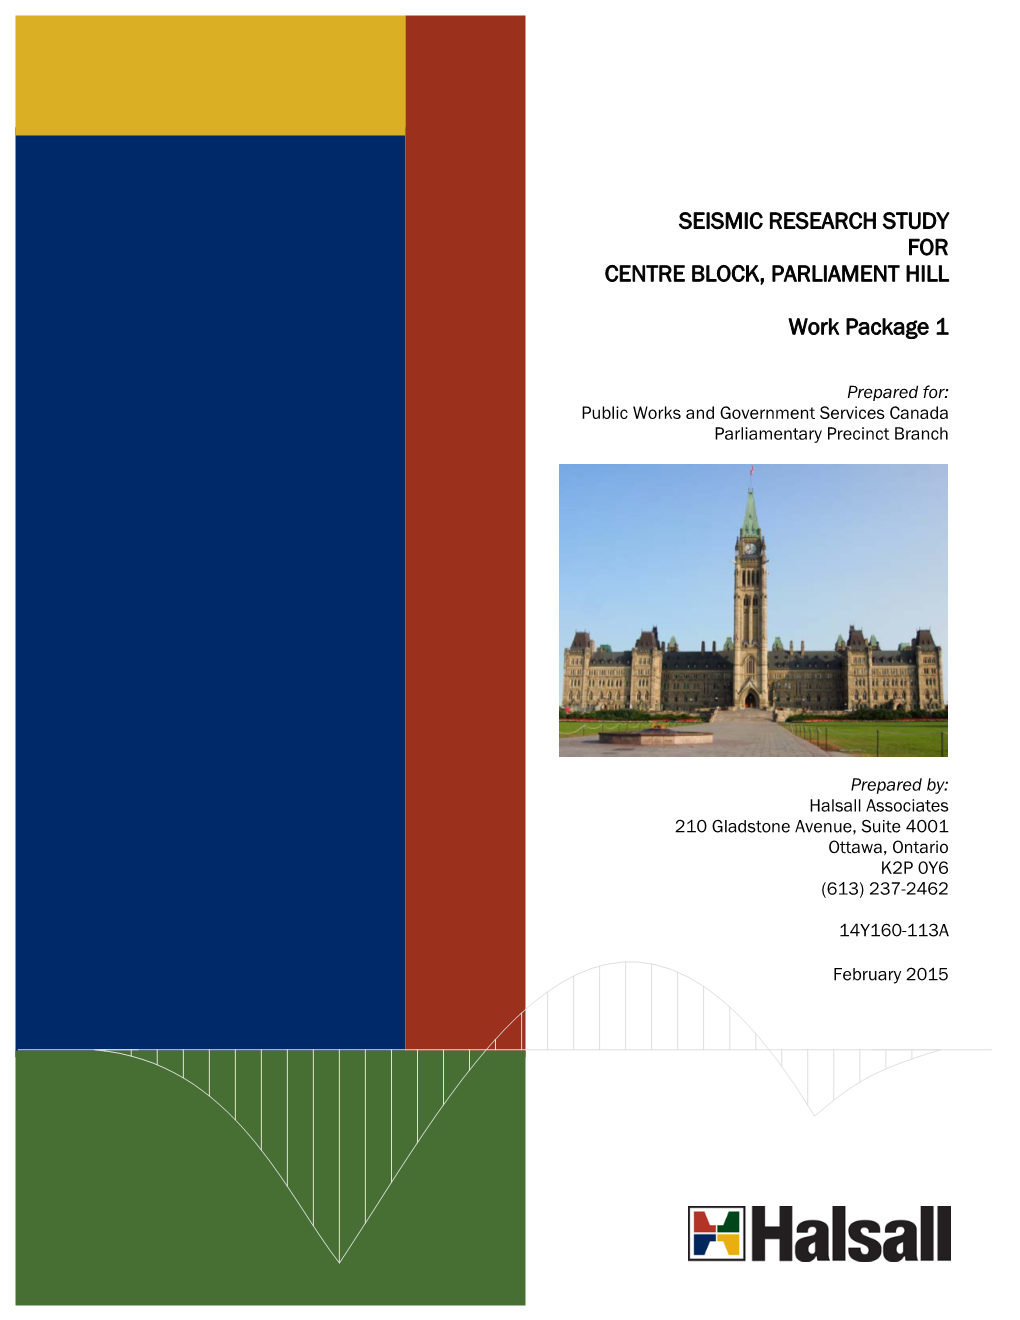 Seismic Research Study for Centre Block, Parliament Hill